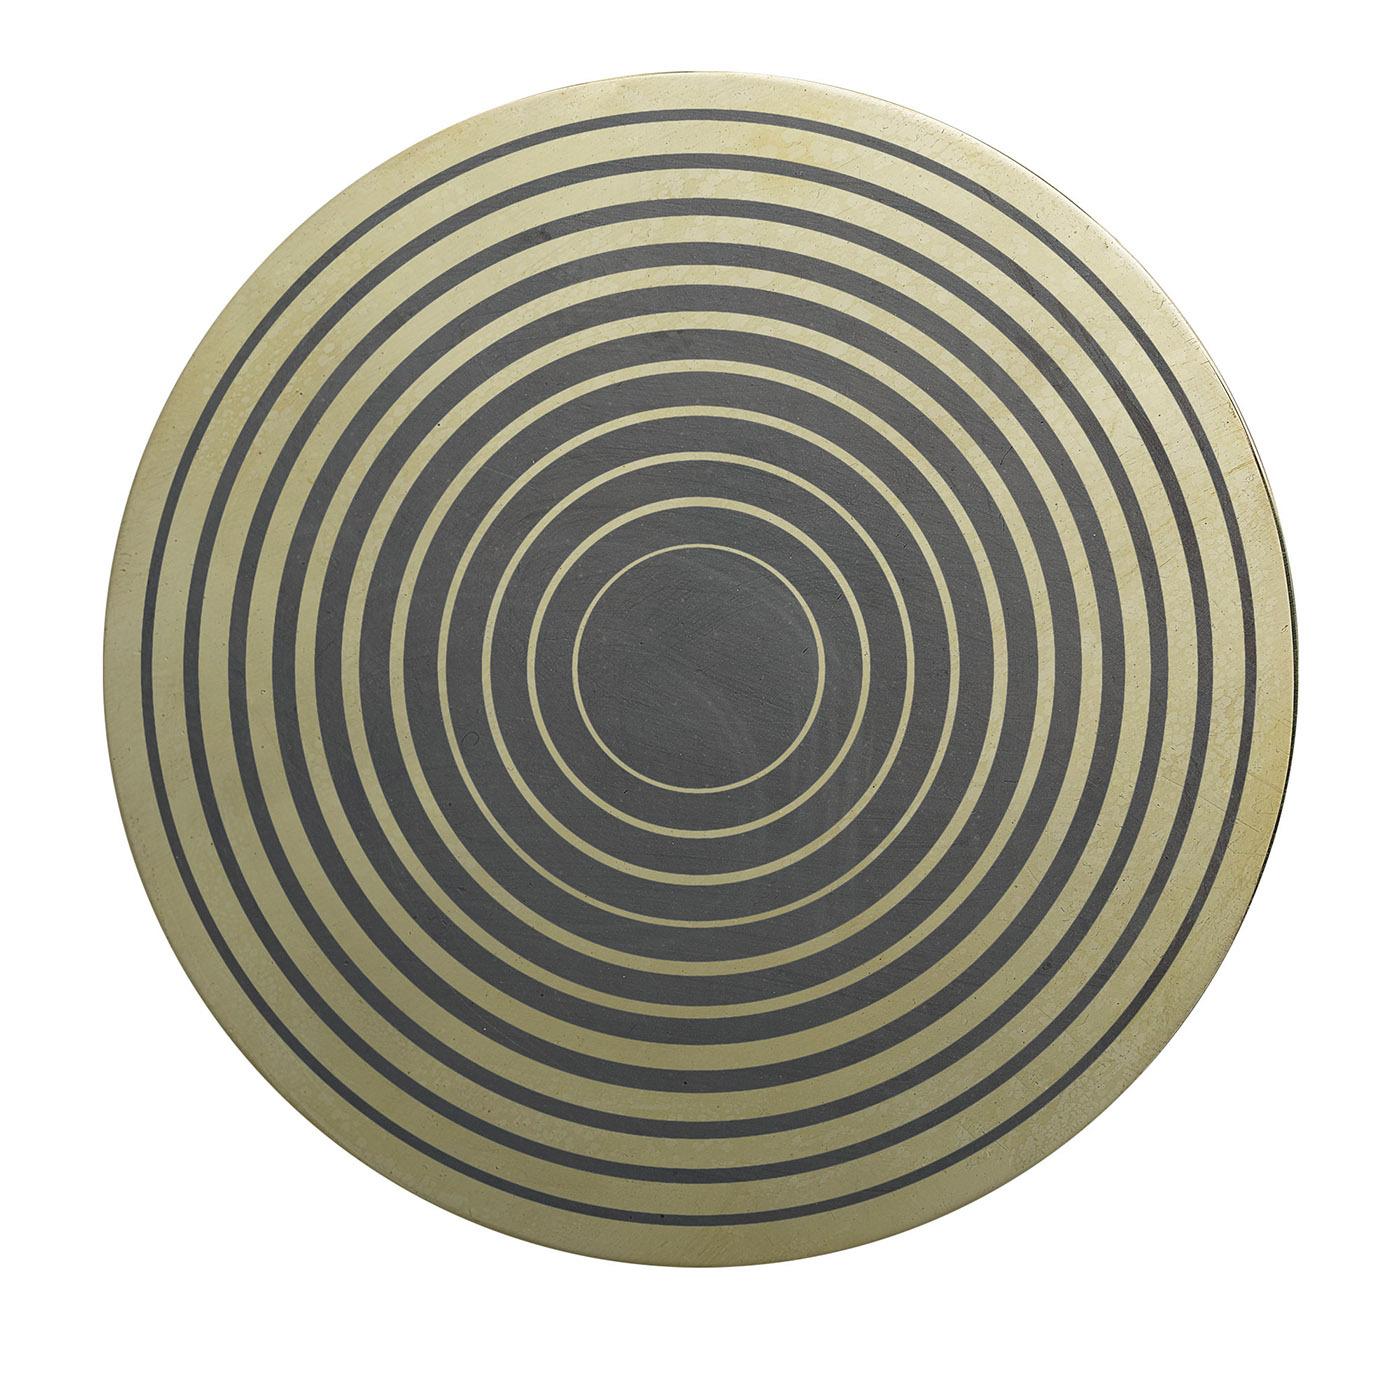 Fashioned of brass and decorated using oxides, this decorative disk will enliven a contemporary or mid-century modern interior. The tenets of Aniconism banning the visual depiction of living and supernatural creatures shared by many cultures